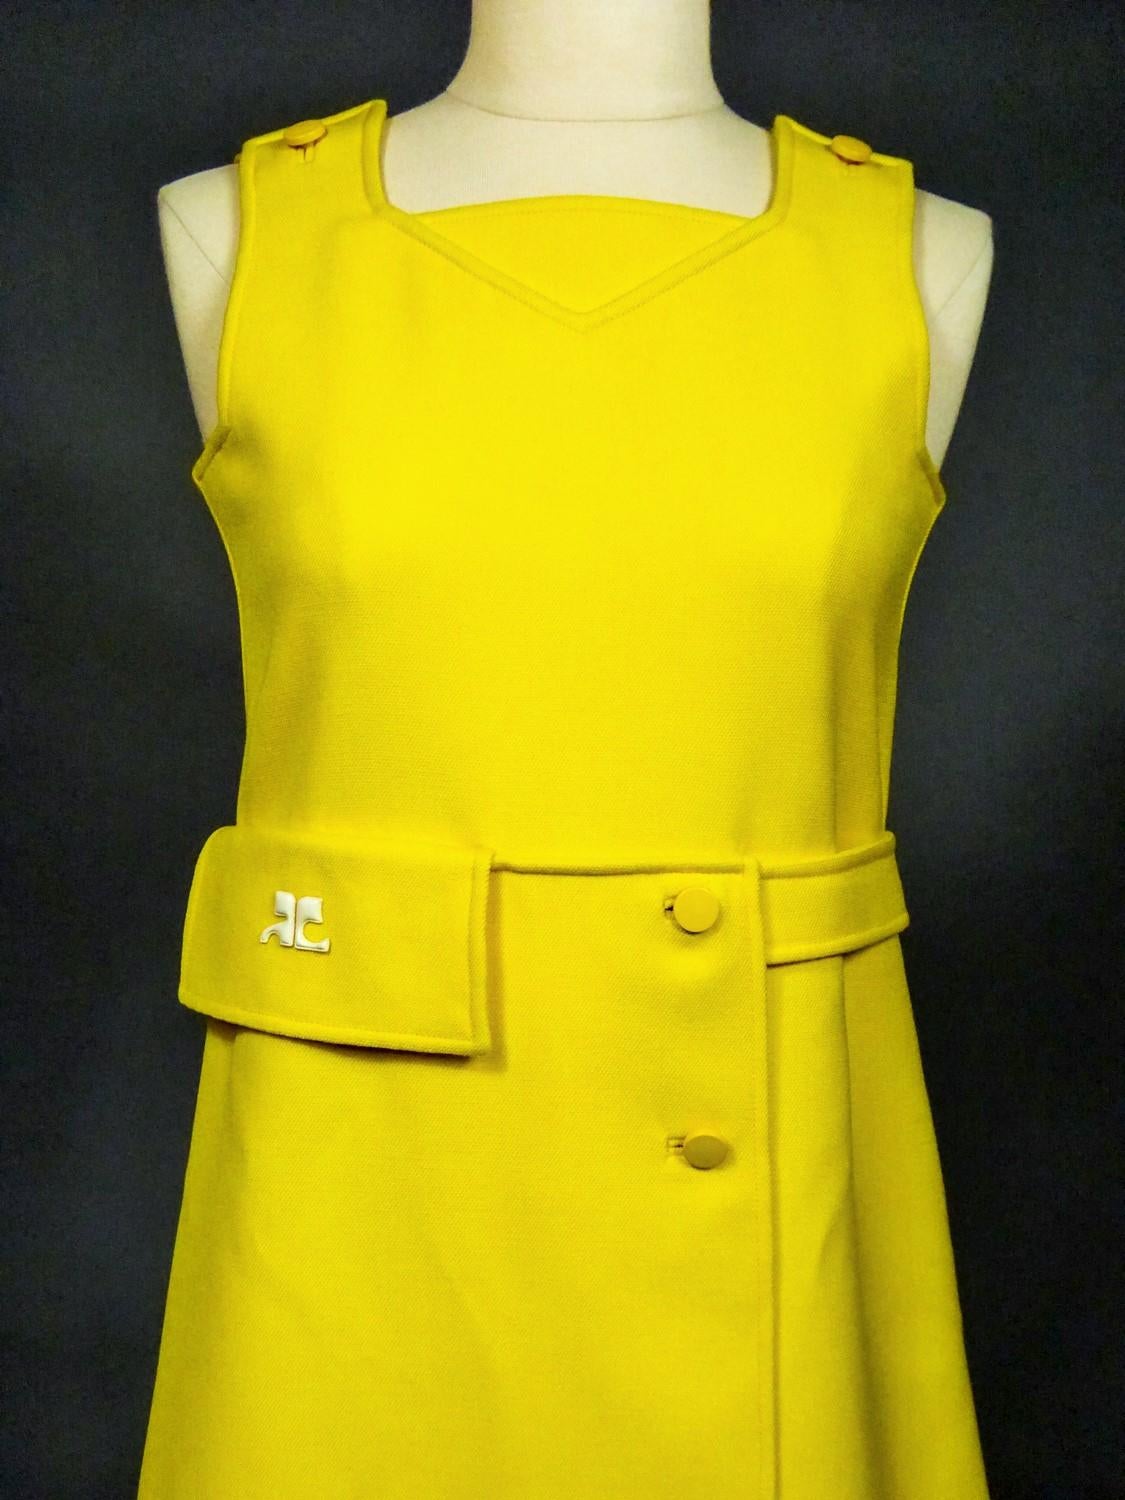 Circa 1968
France

André Courrèges Haute Couture mini dress in thick chick yellow jersey numbered 102322 and dating from the late 1960s. Thick cotton polyamide twill jersey frequently used in Haute Couture. High waist chasuble cut, sleeveless with